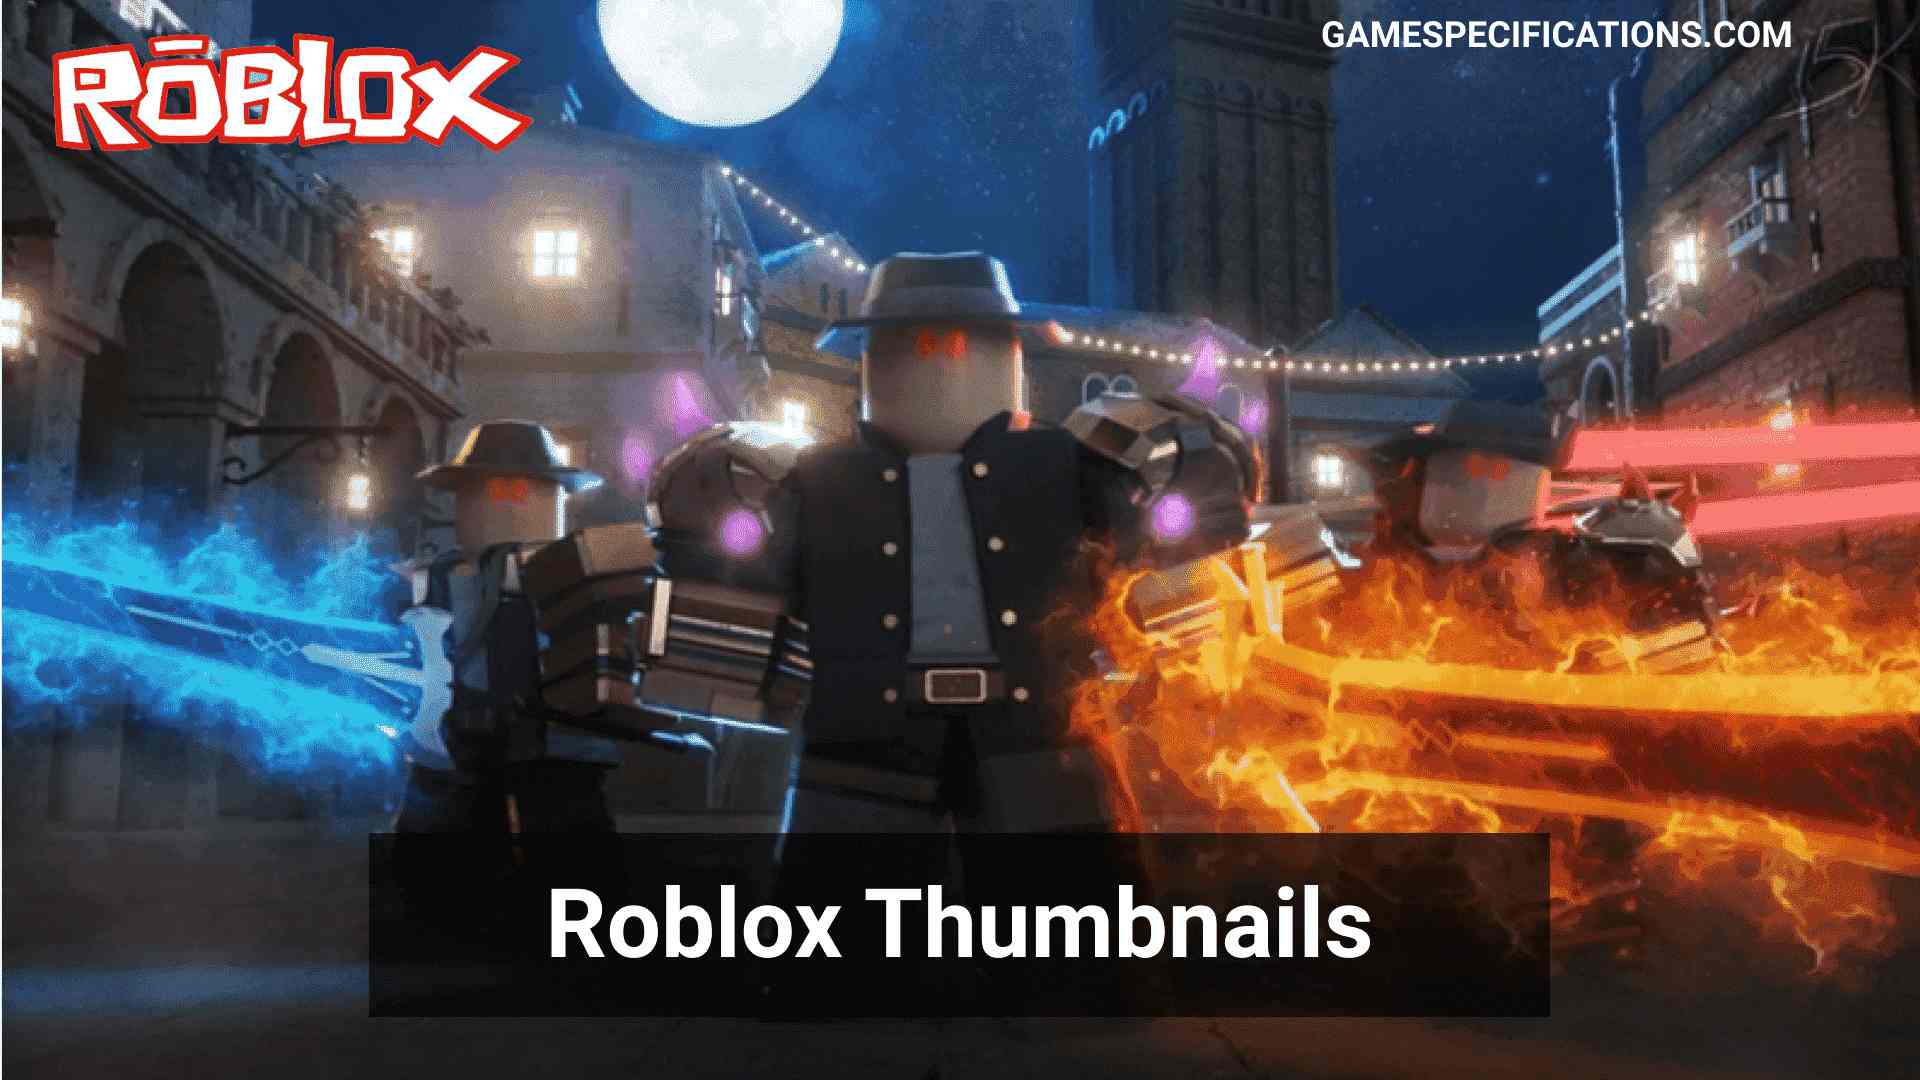 Roblox Thumbnails An Ultimate Guide On Awesome Thumbnails Generation 2021 Game Specifications - roblox game thumbnail